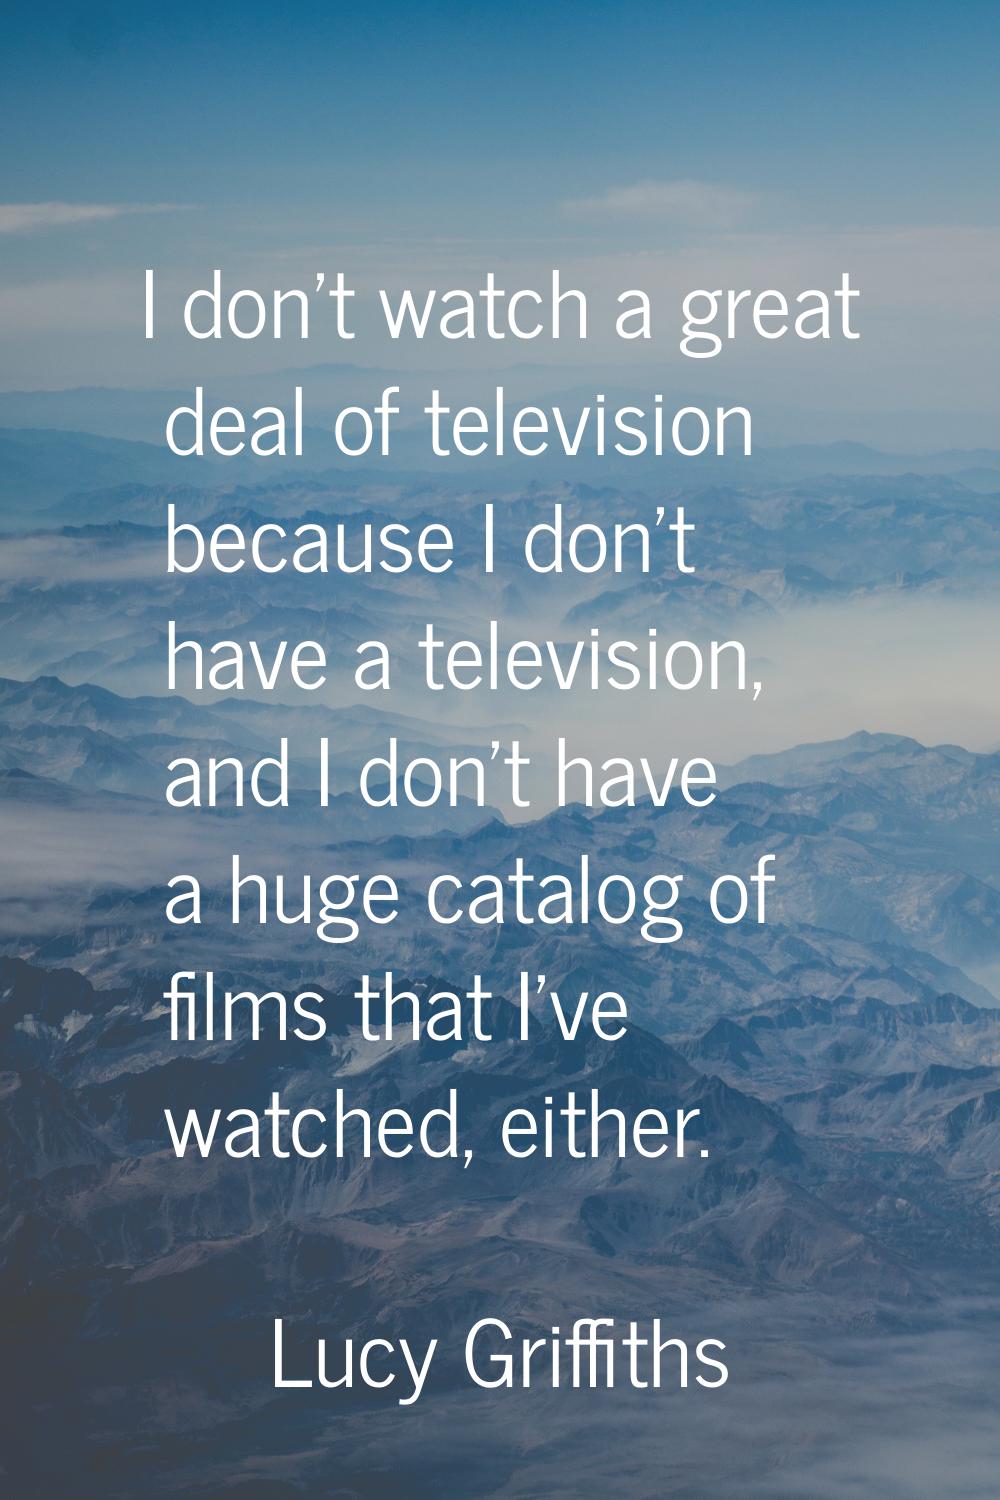 I don't watch a great deal of television because I don't have a television, and I don't have a huge